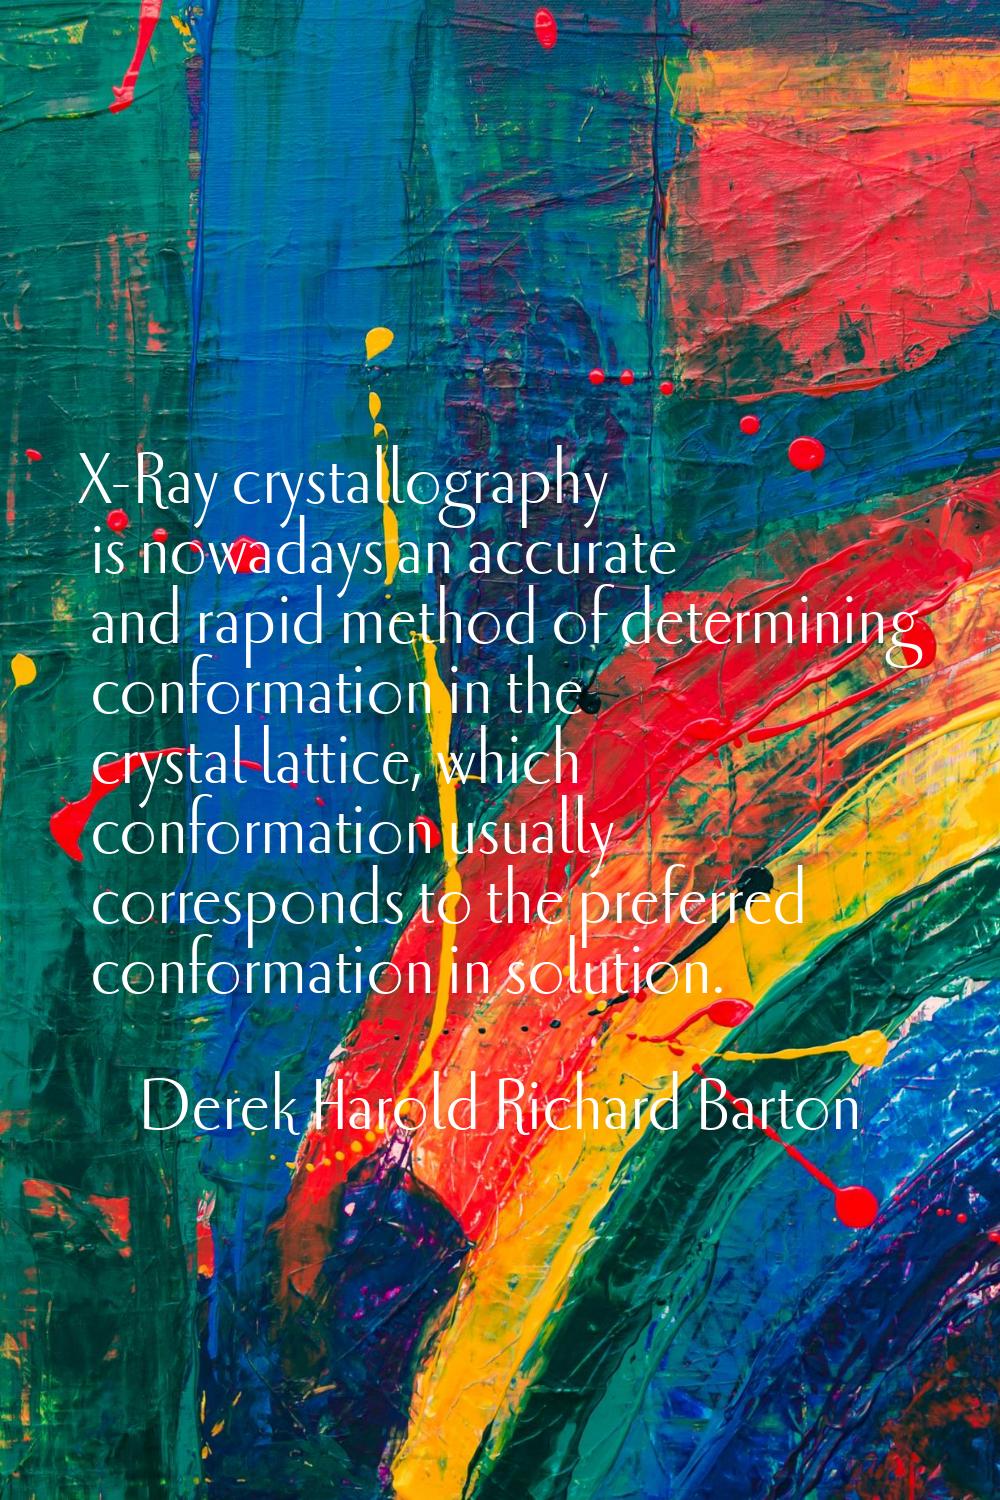 X-Ray crystallography is nowadays an accurate and rapid method of determining conformation in the c